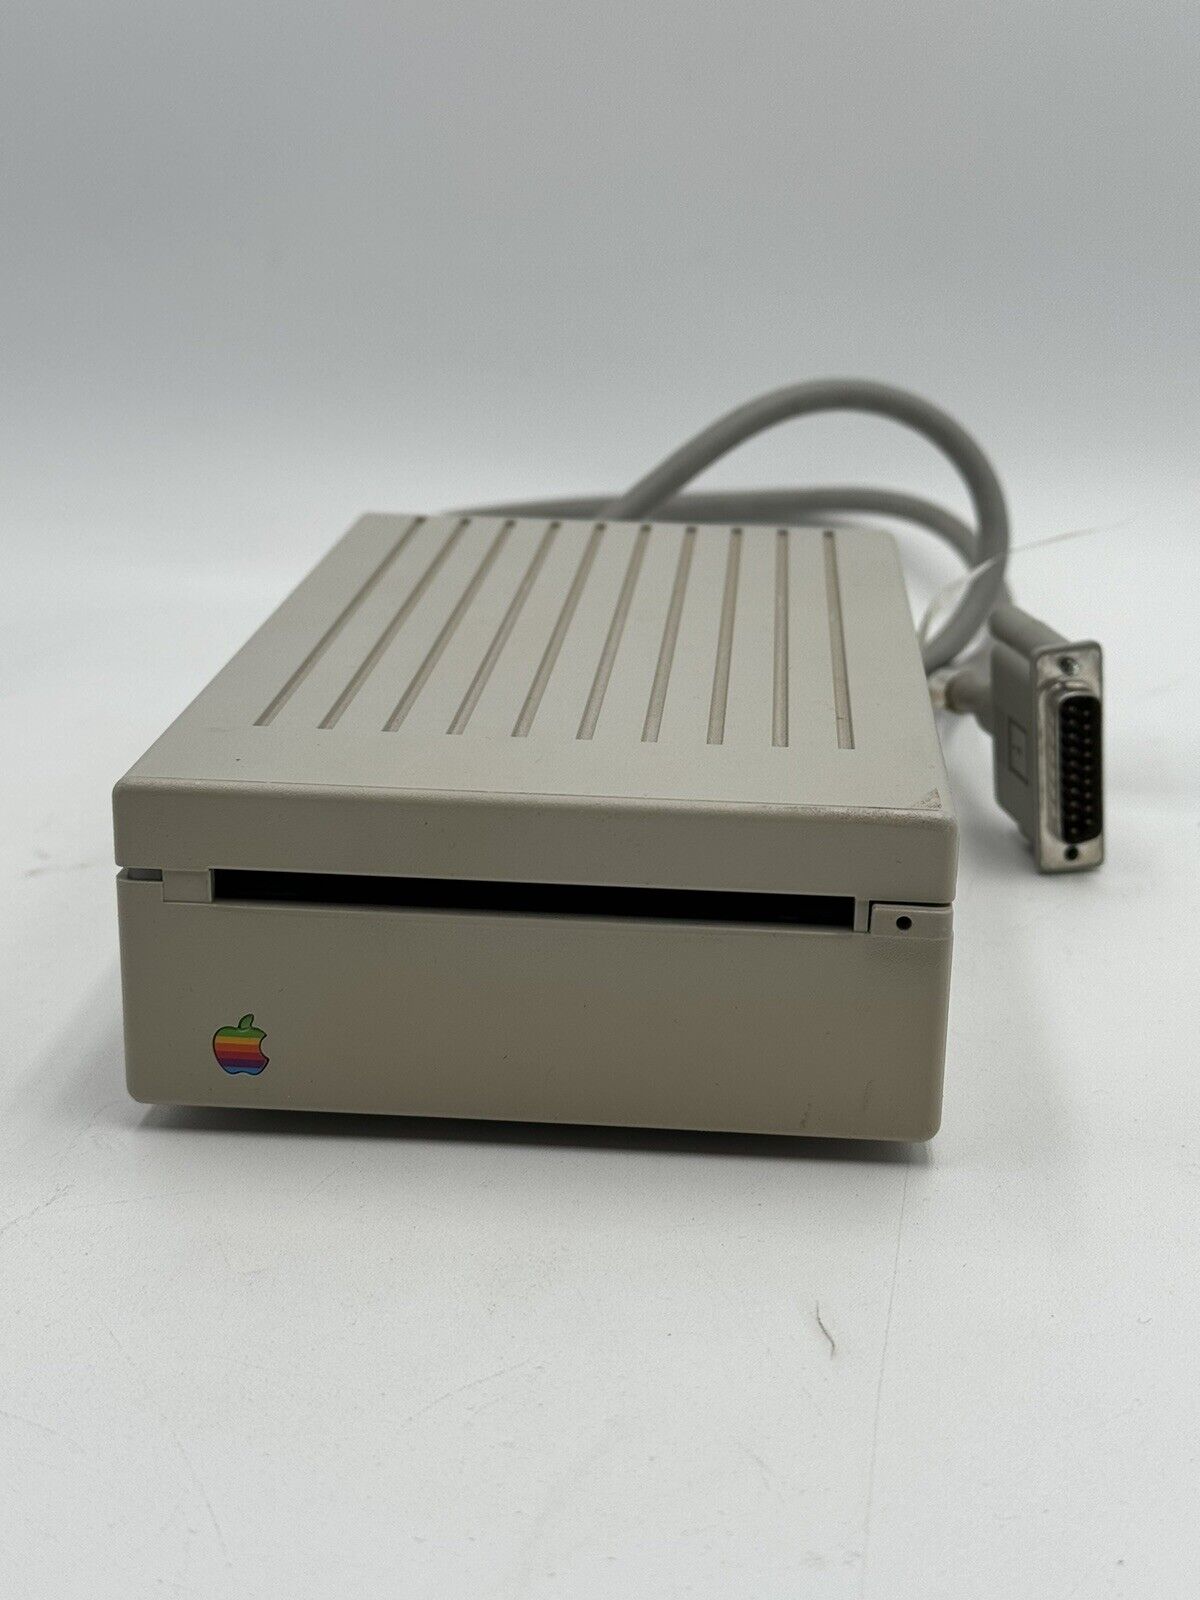 Vintage Apple 3.5 Drive Floppy Disk Drive A9M0106 Tested Working Nice